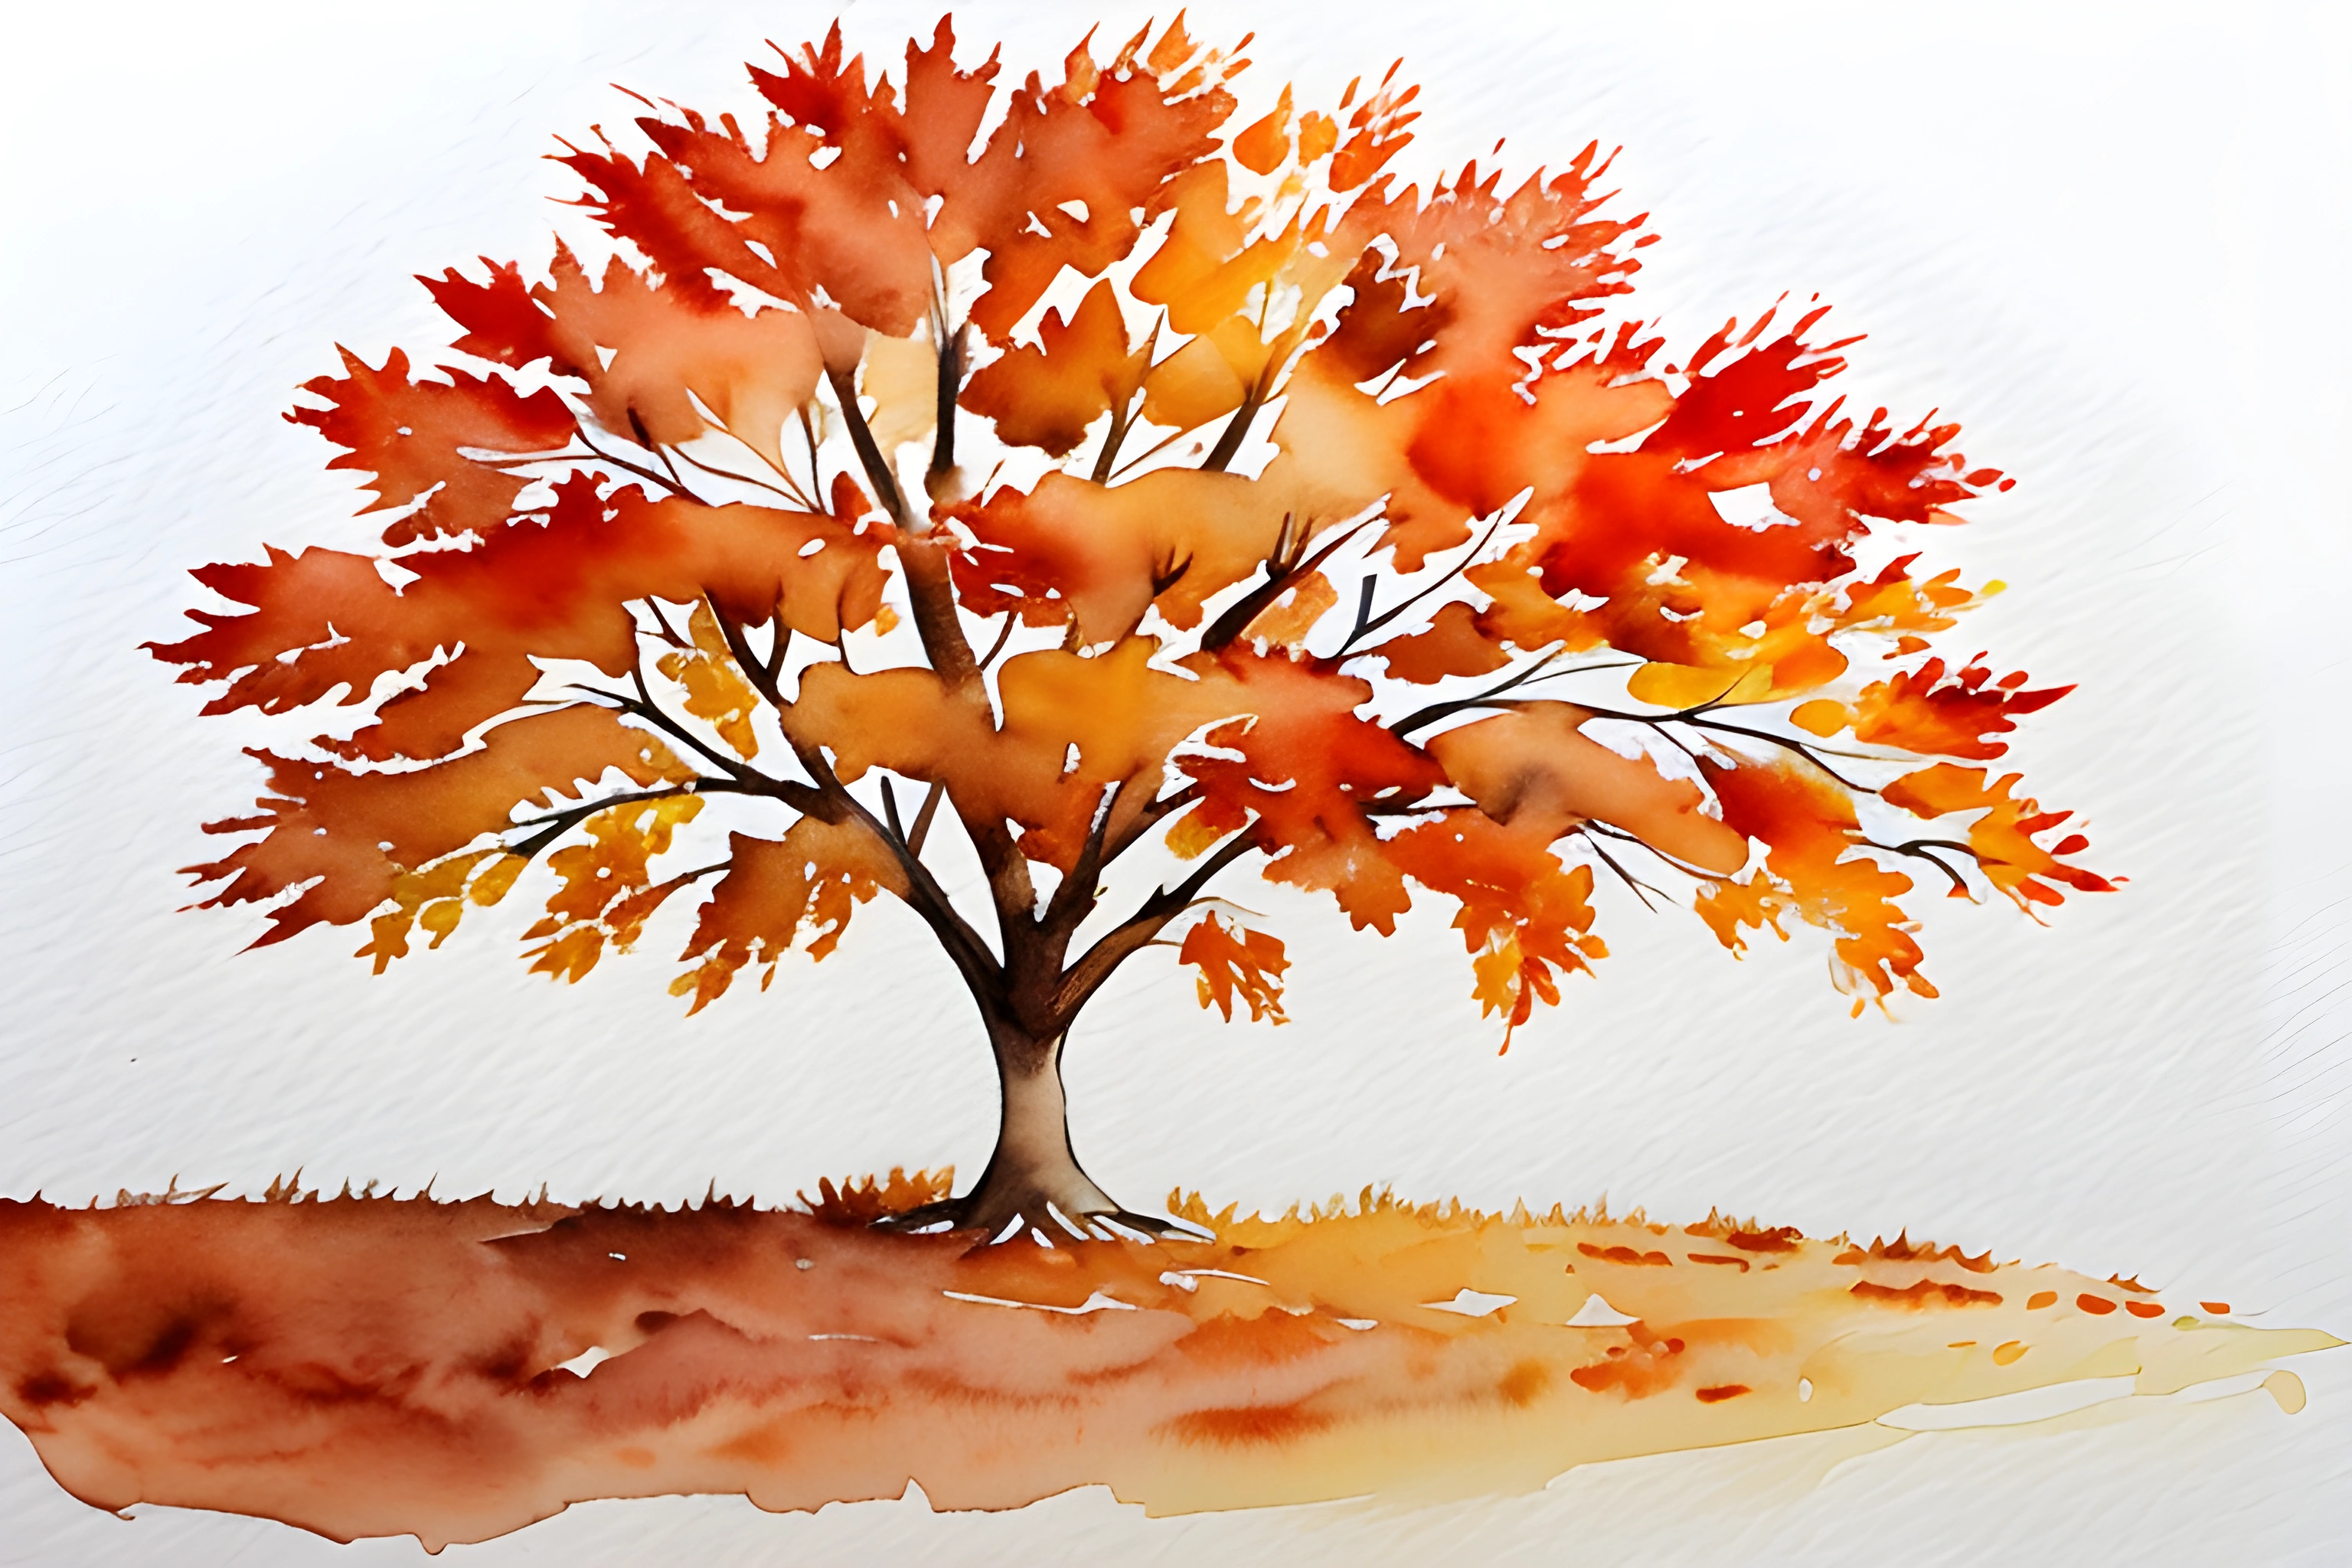 a painting of a tree with orange leaves on it